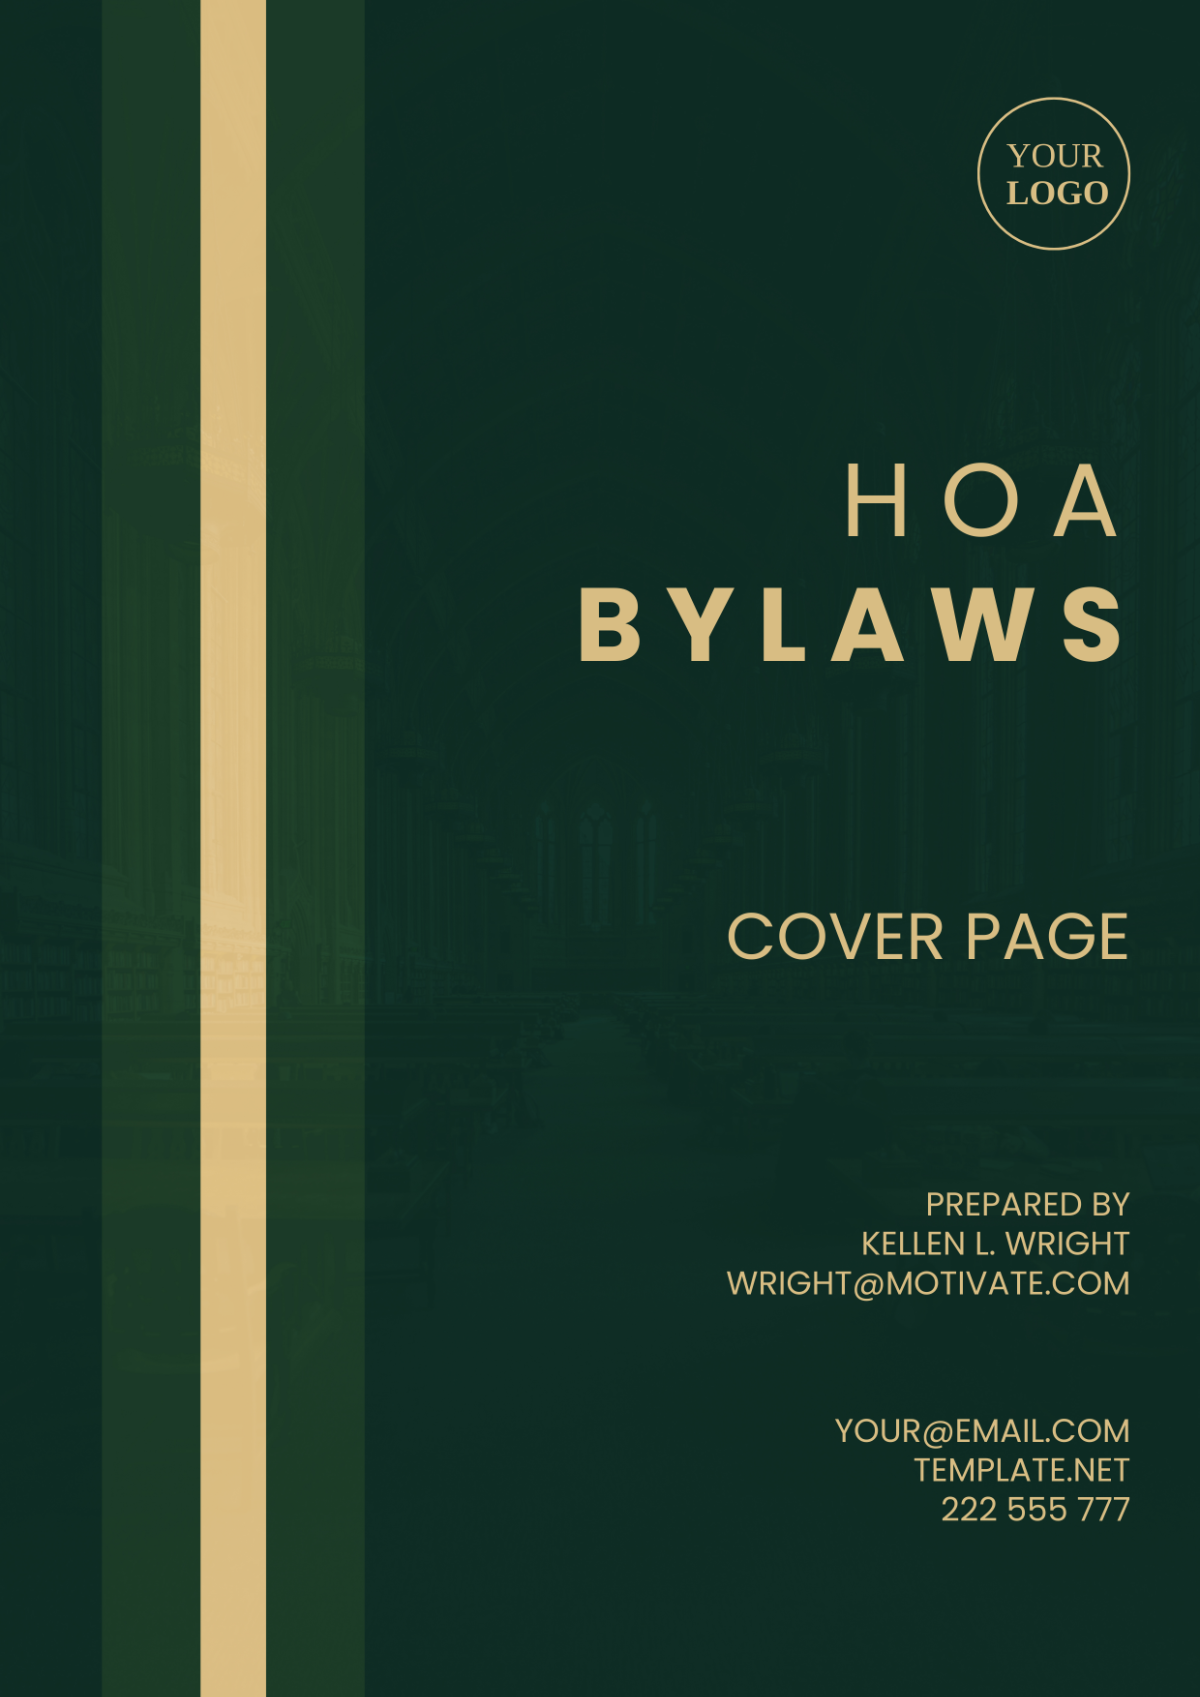 HOA Bylaws Cover Page